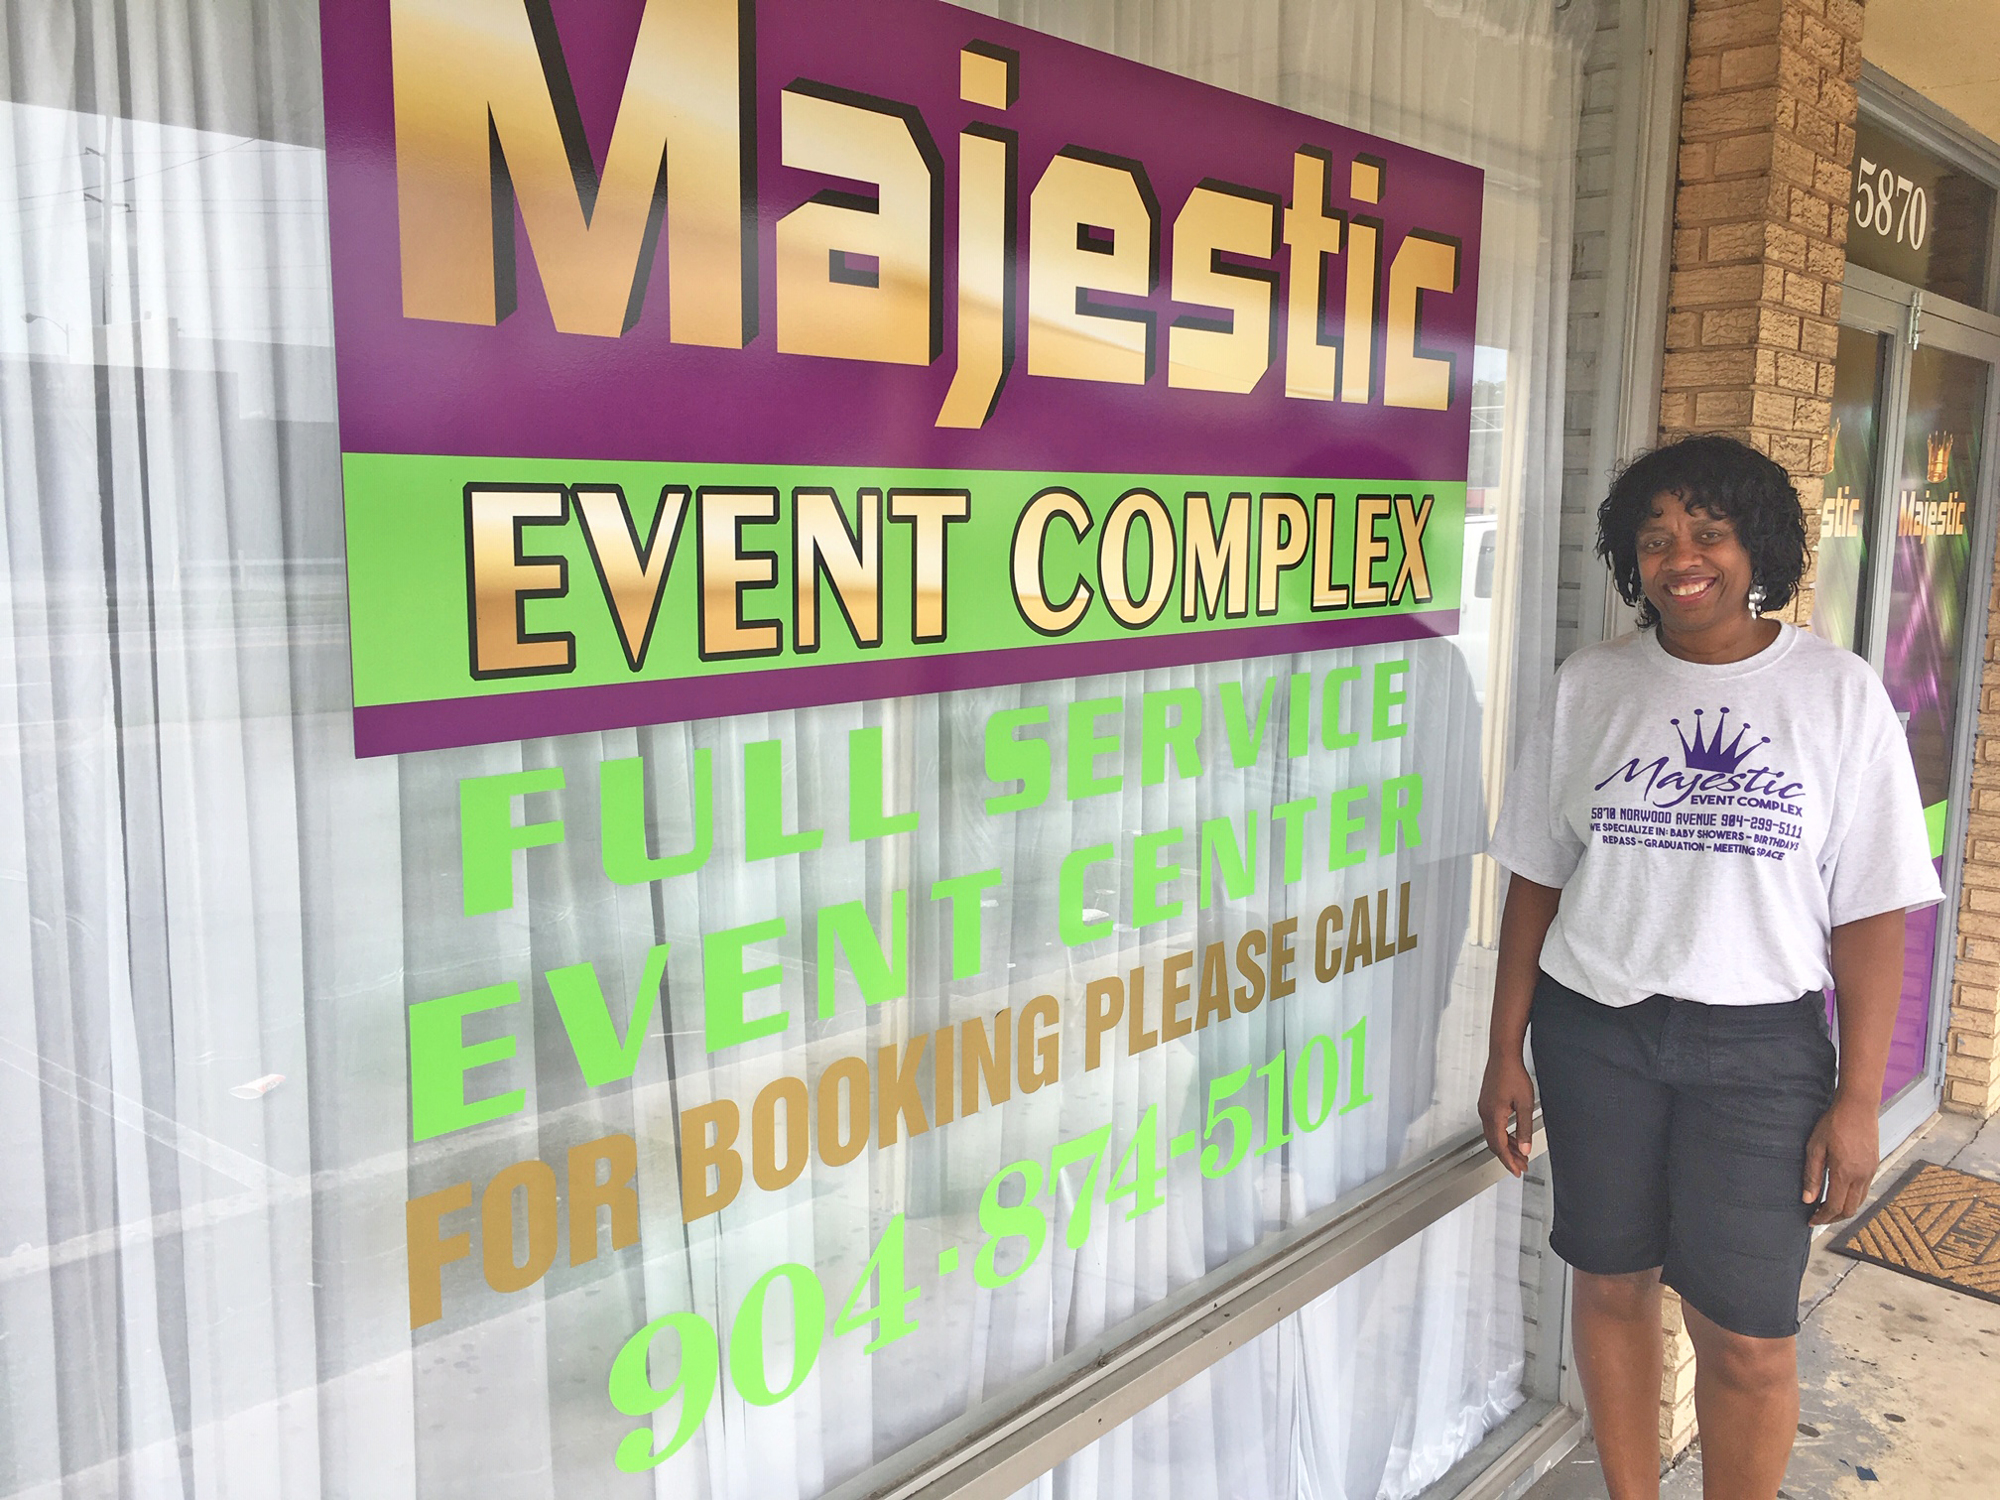 Ladreeka Atwater stands outside her latest venture, Majestic Event Complex on Norwood Avenue. Her goal is to provide an affordable event space on the Northside.